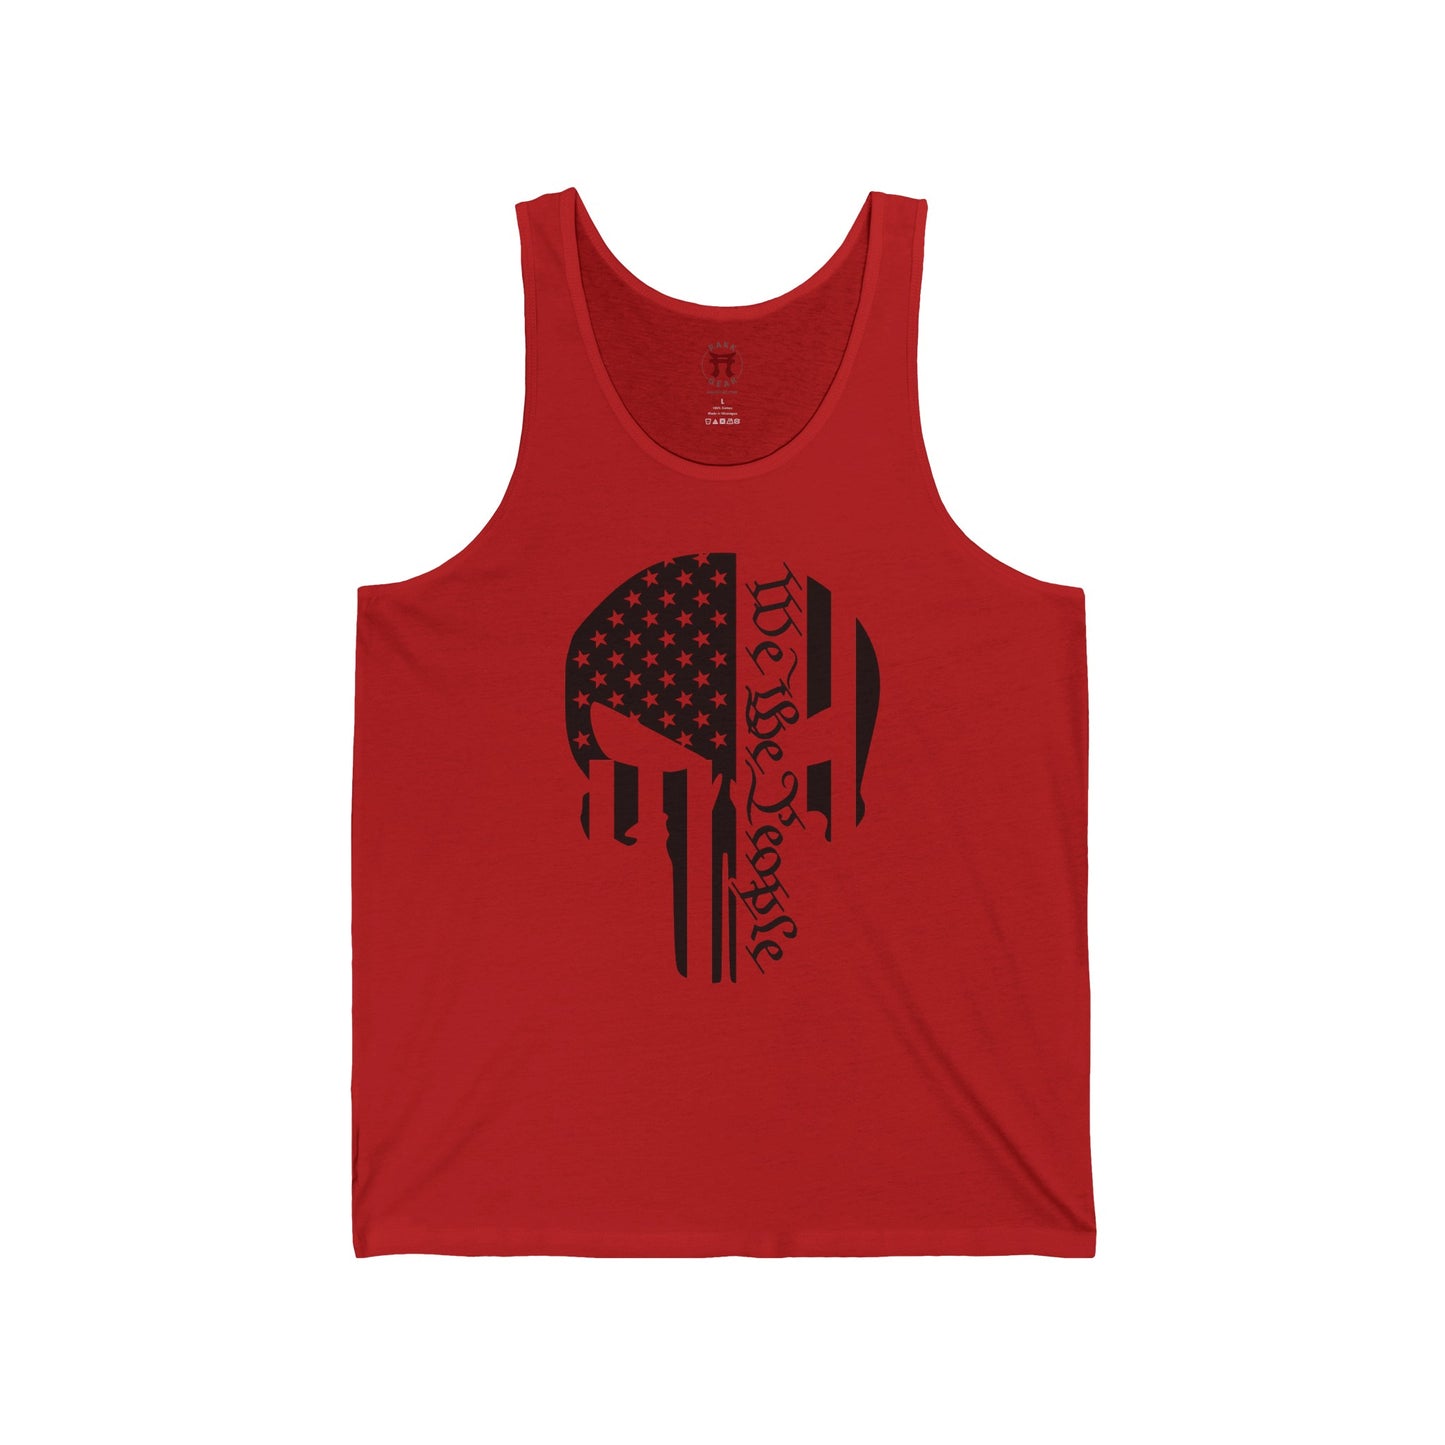 Rakkgear Punisher We The People Tank Top in red